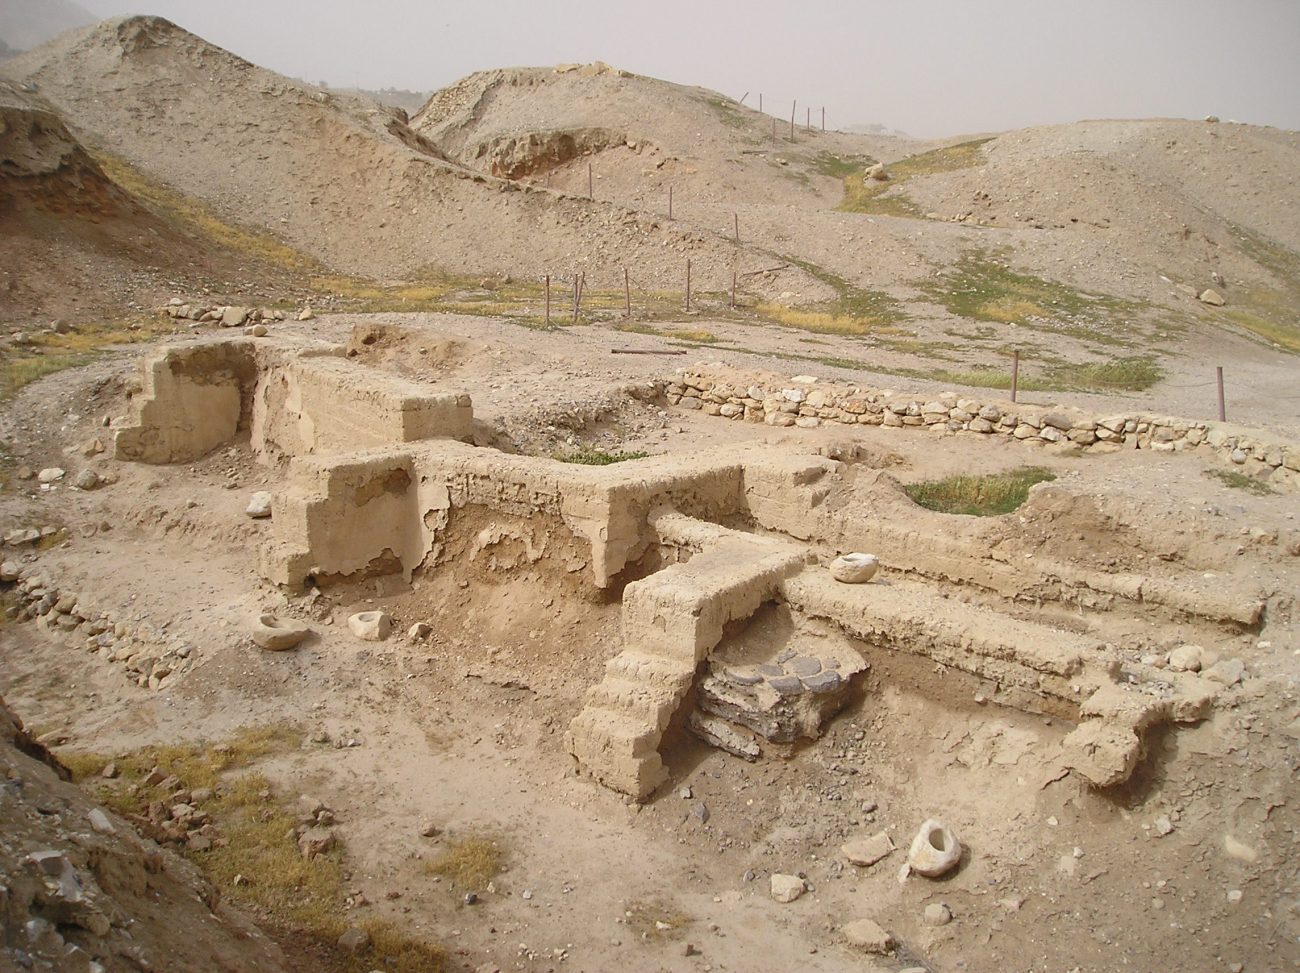 Dwelling foundations unearthed at Tell es-Sultan in Jericho. Image Credit: Wikimedia Commons.